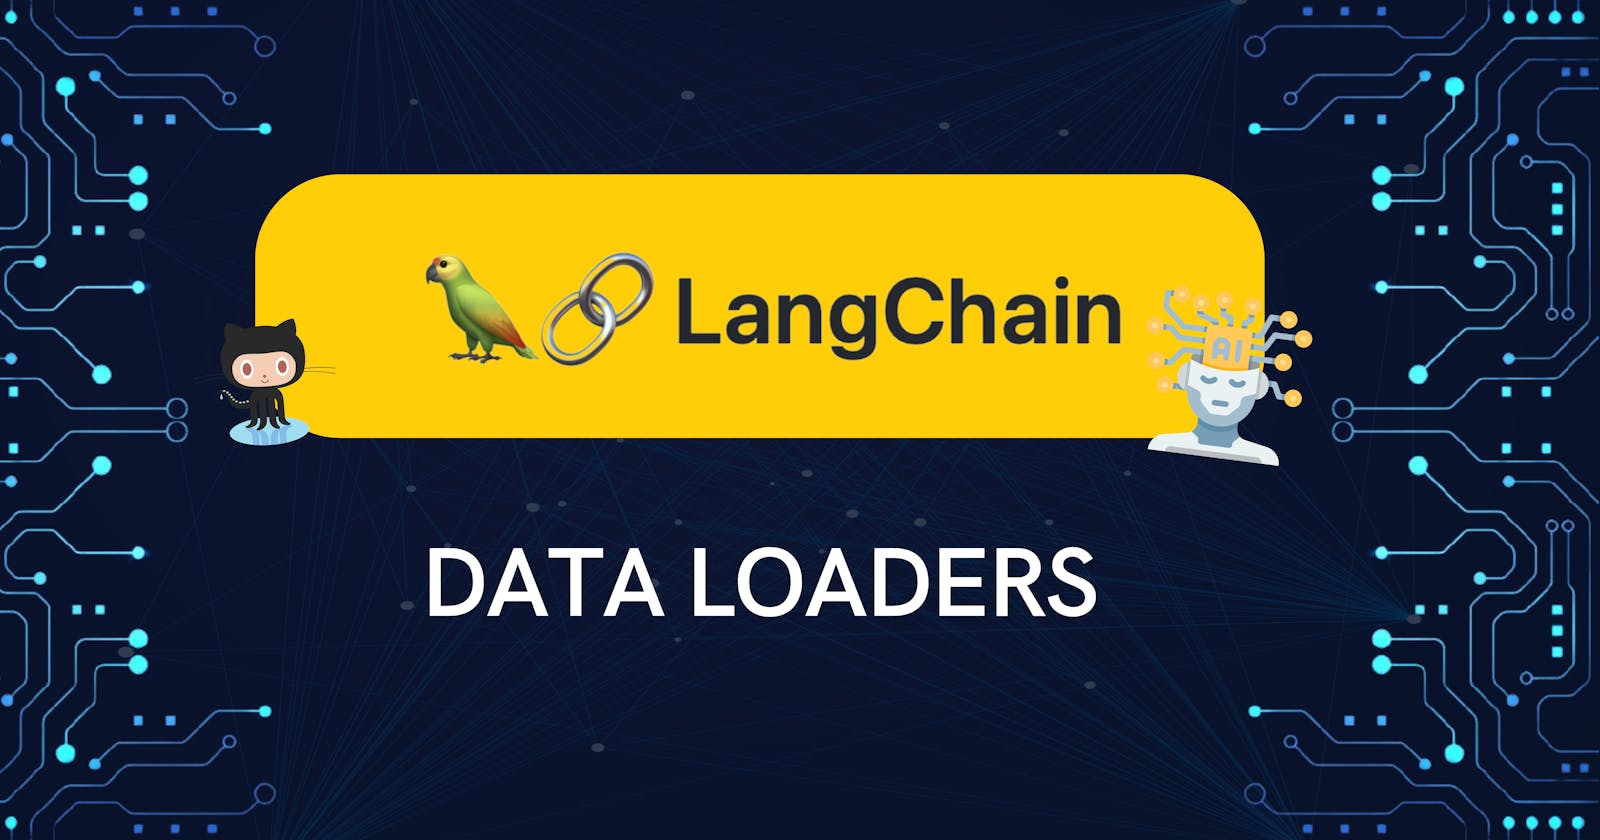 The ultimate LangChain series — data loaders